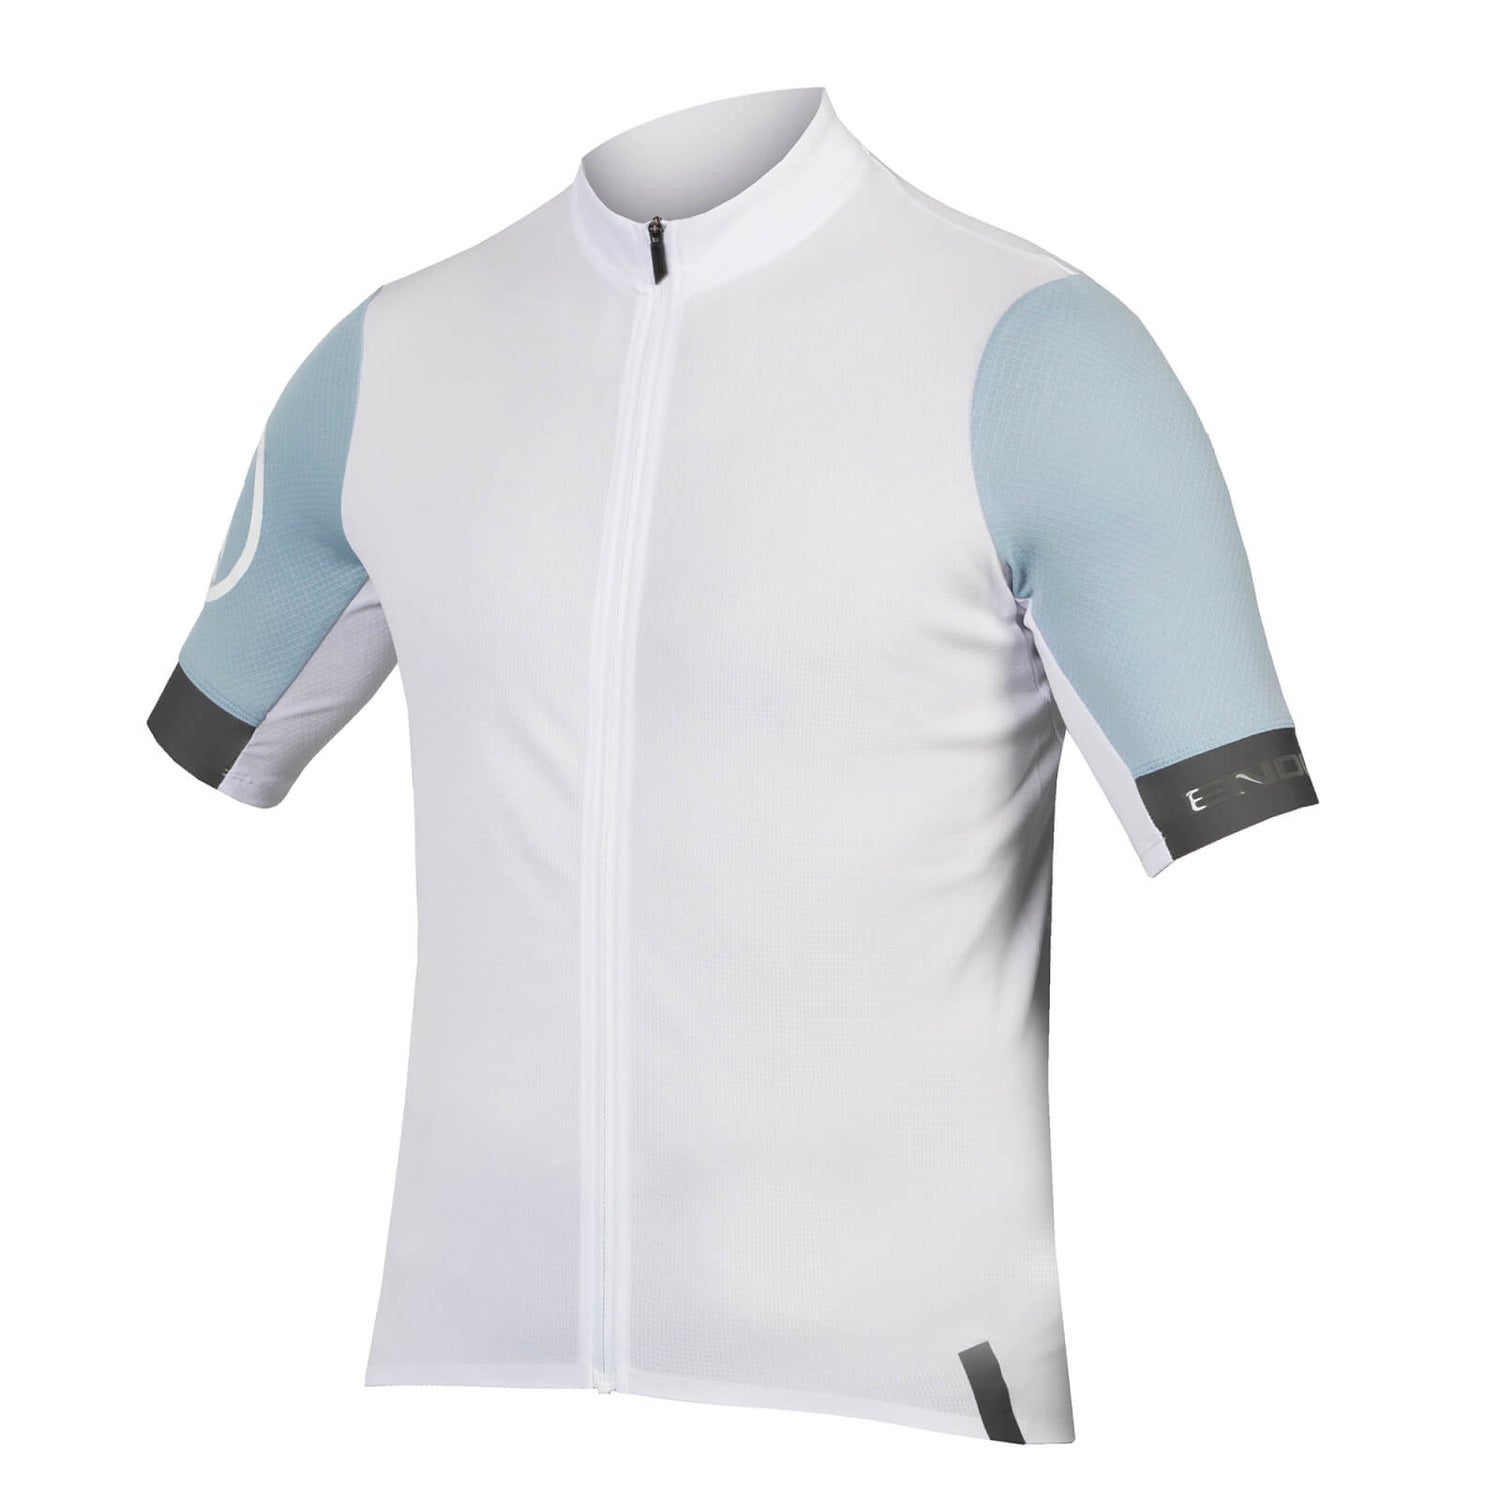 Men's FS260 S/S Jersey - White - XXL (Relaxed Fit)